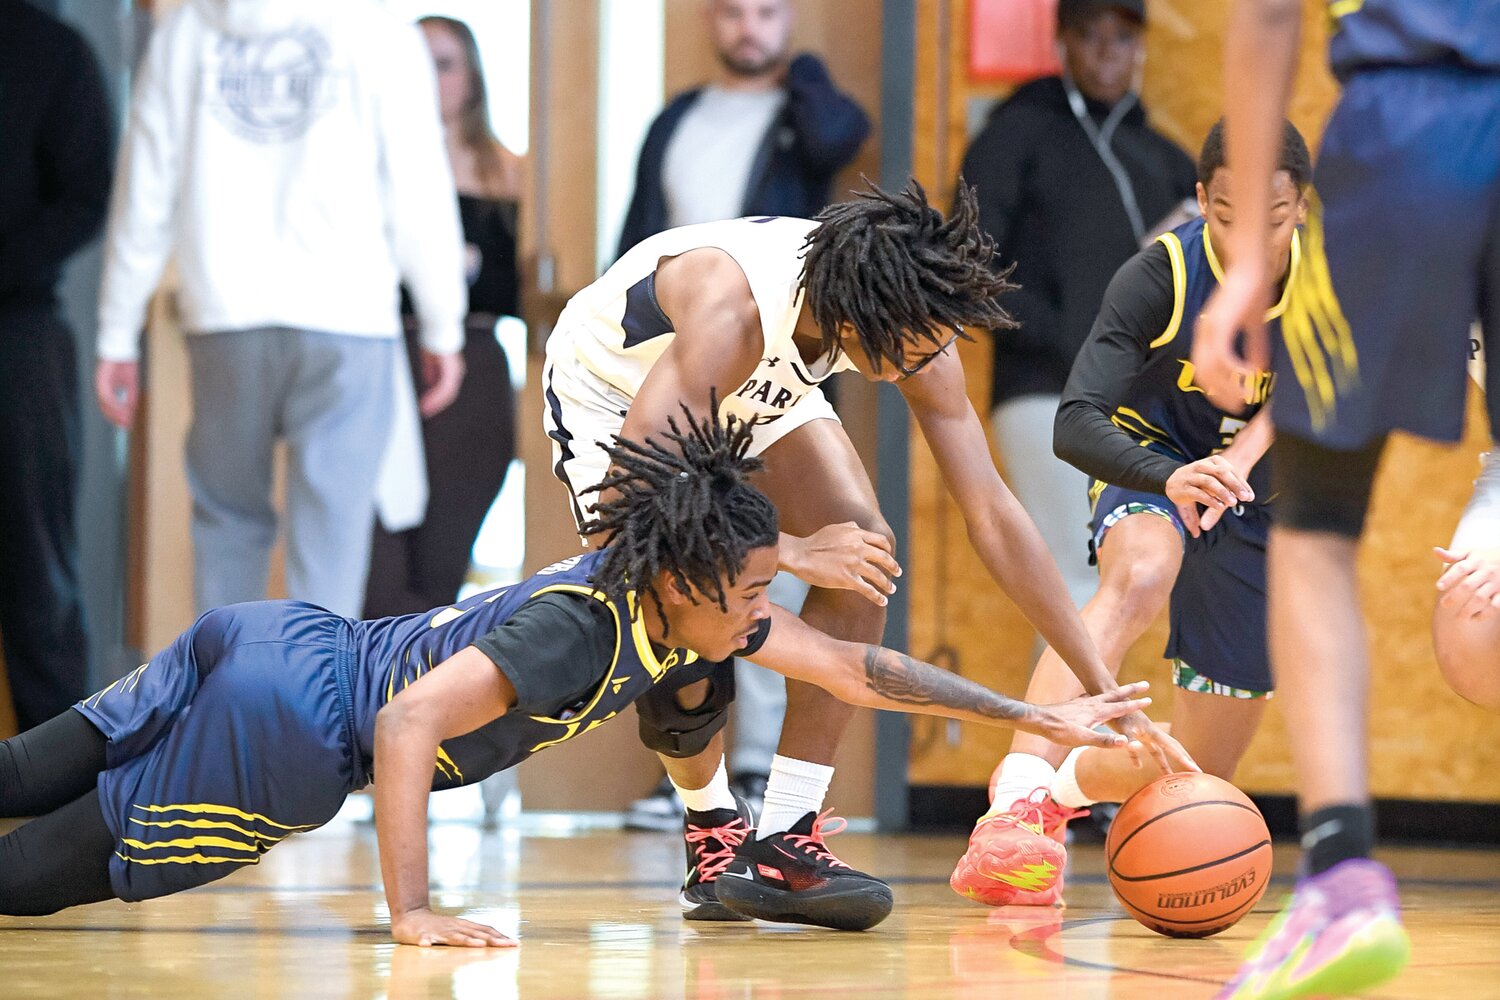 City’s Talan Hawkins lunges for a loose ball in front of Solebury’s Ari Johnson.